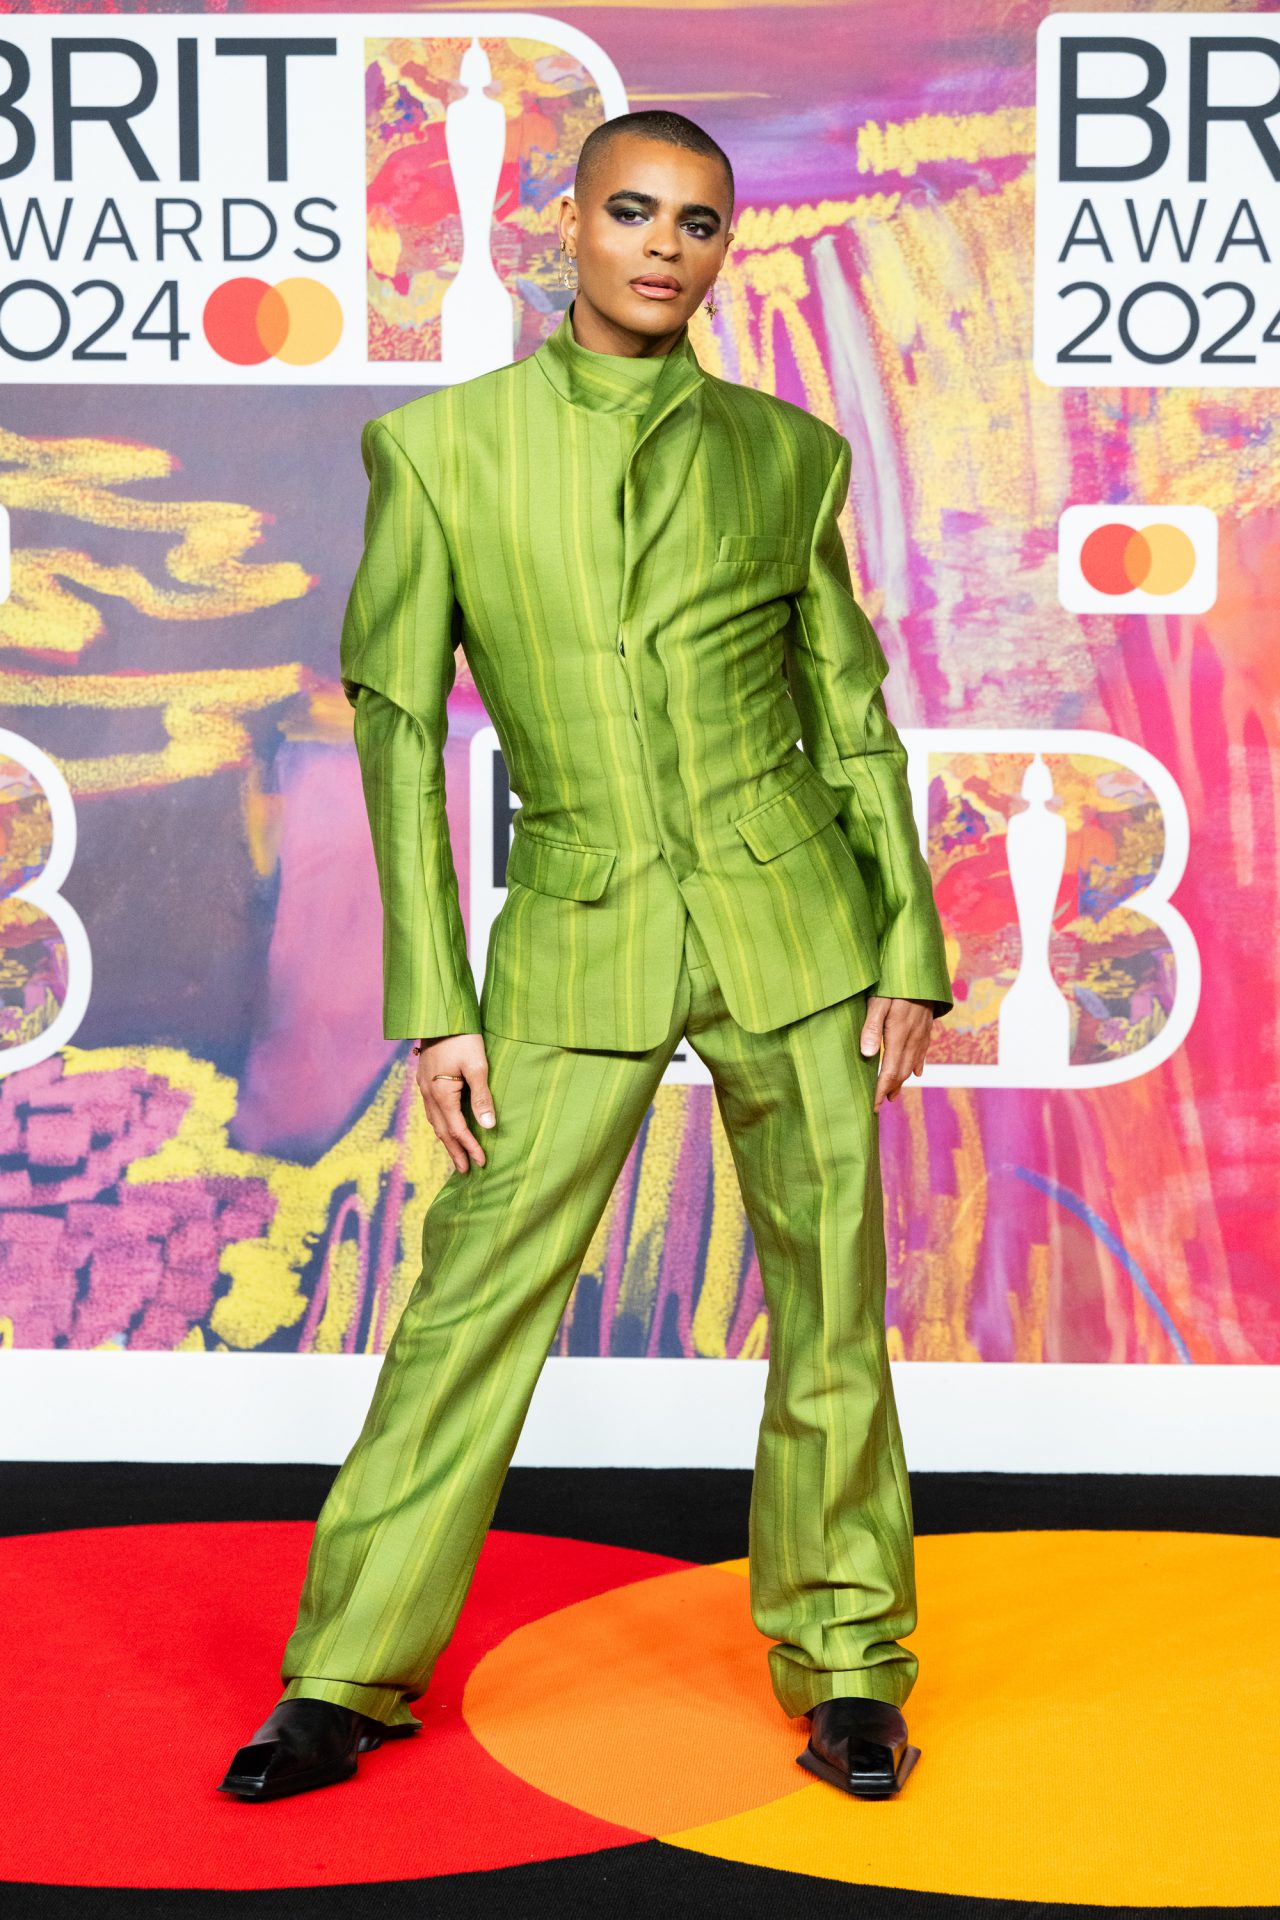 BRIT Awards 2024 The red carpet (best and worst looks)